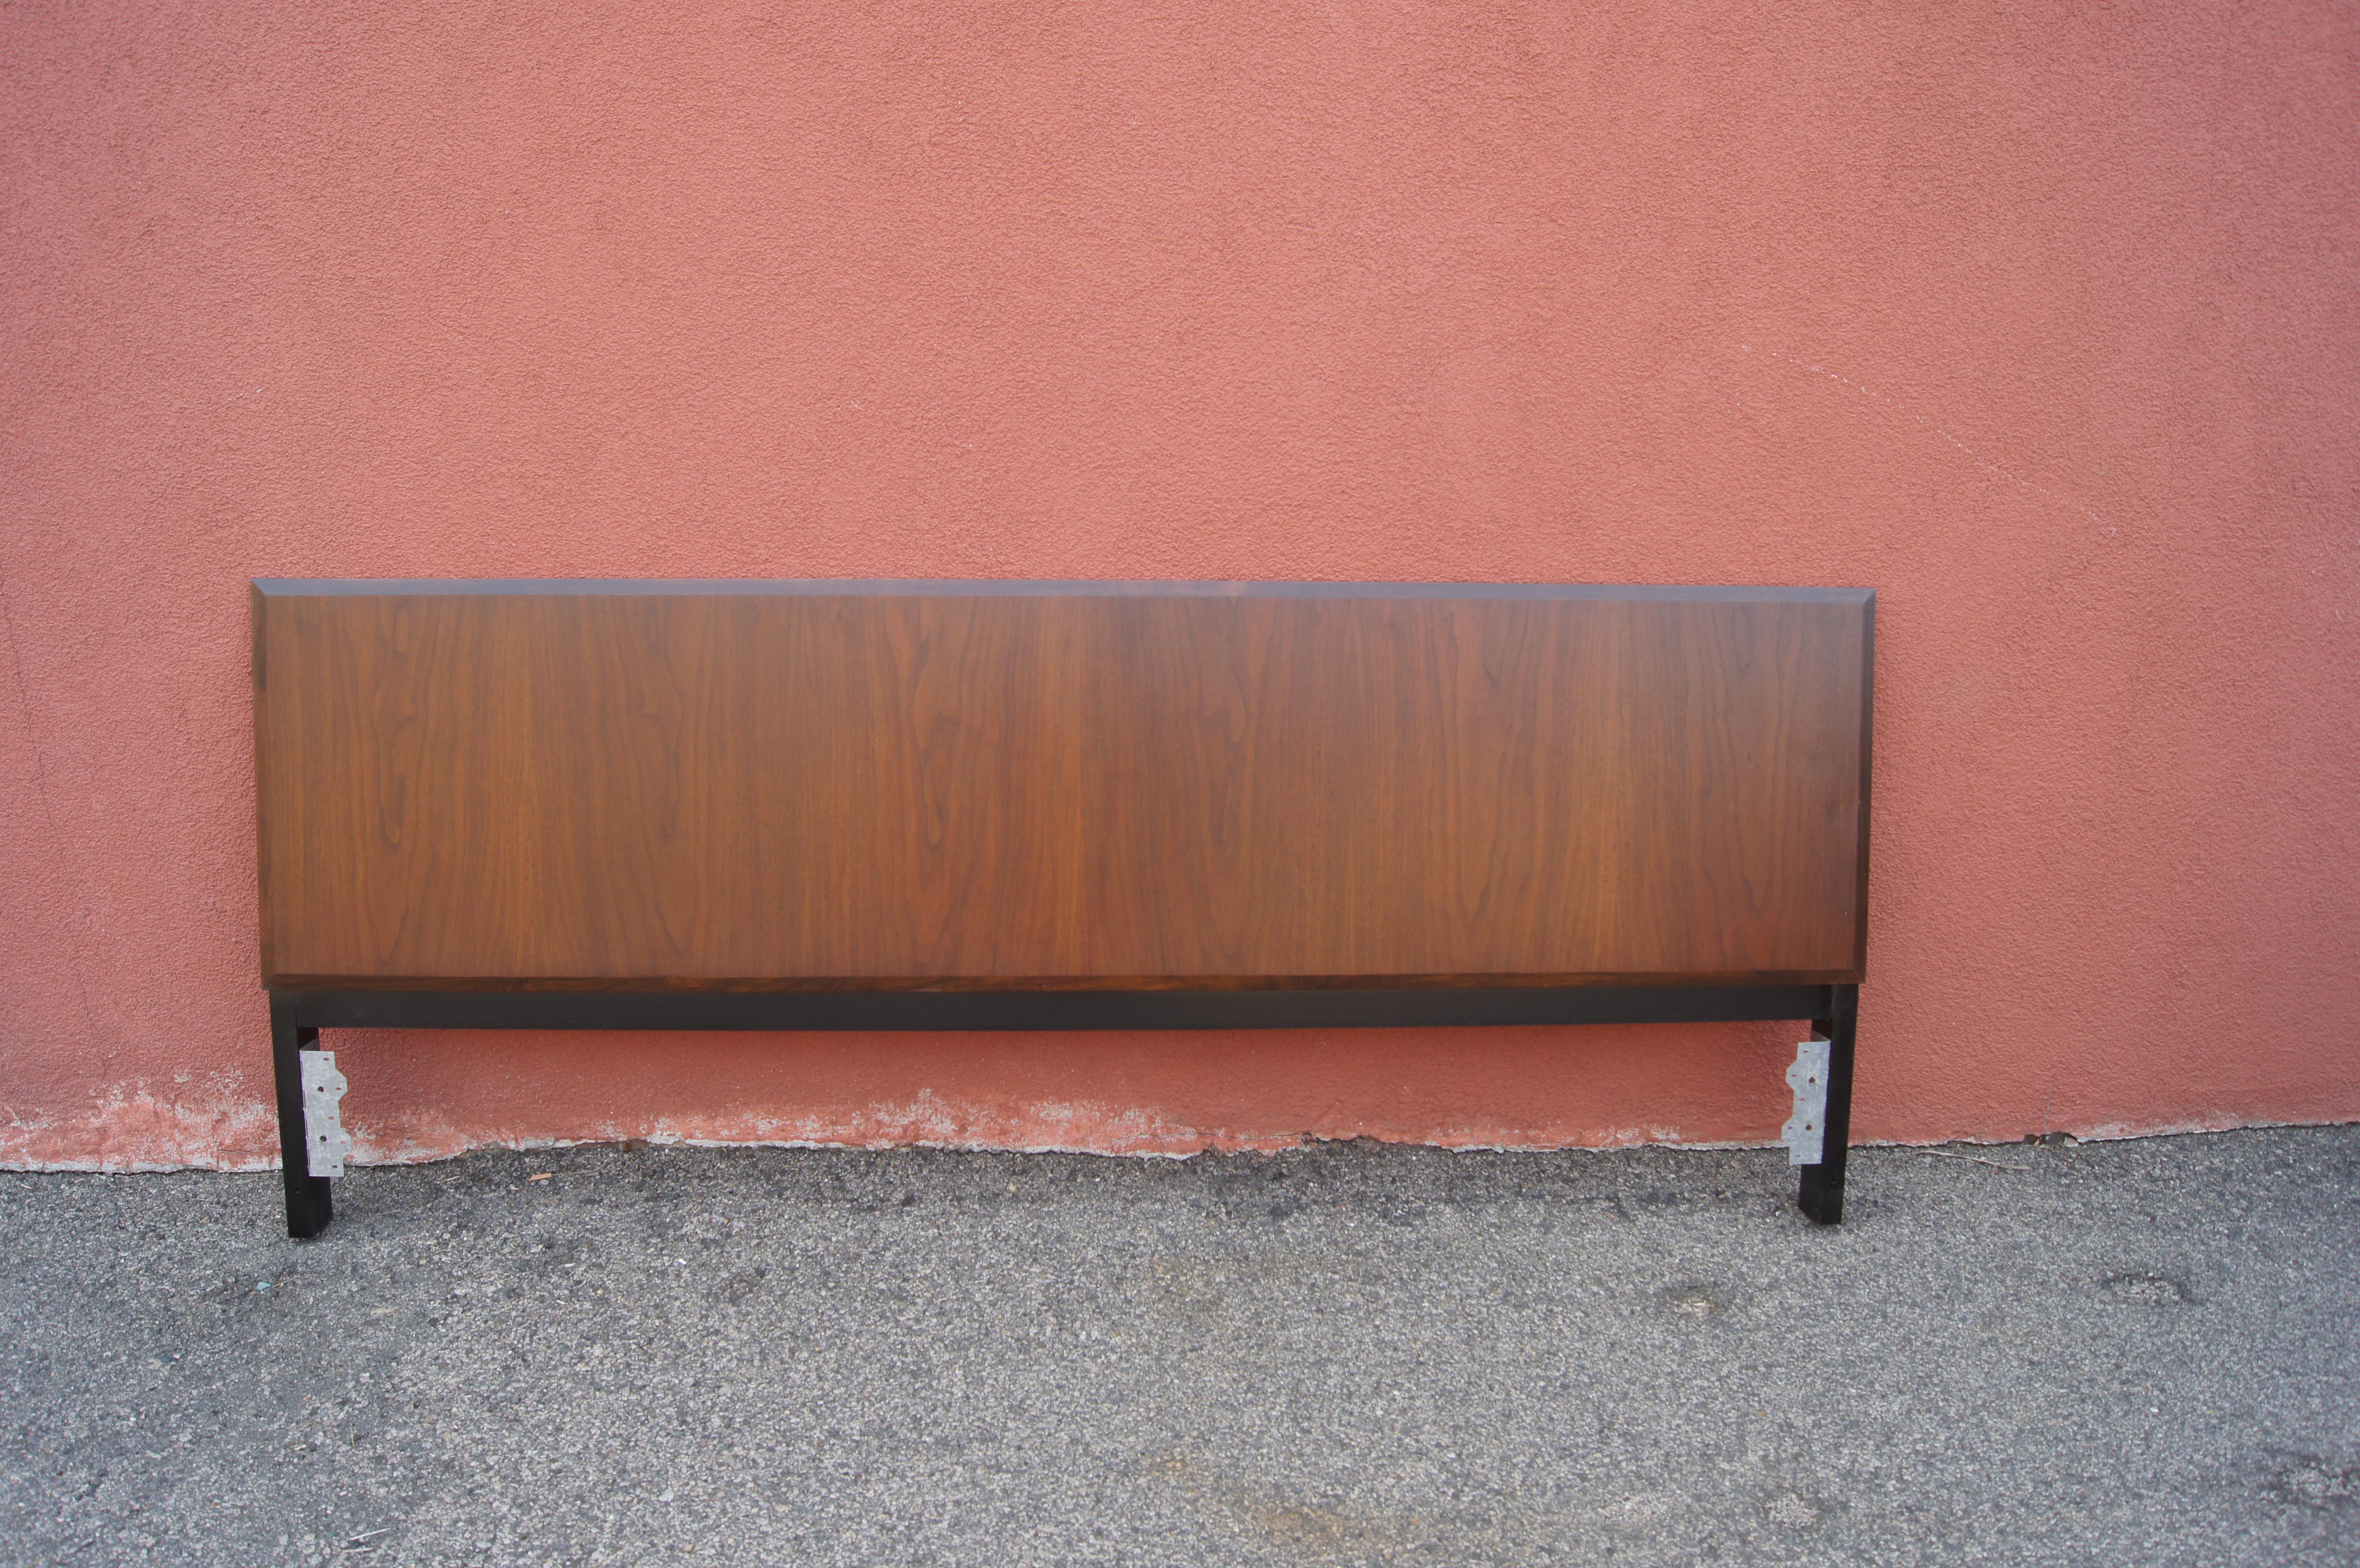 Milo Baughman designed by this mid-century headboard for the Directional Furniture Company. Crafted of .75 inch-thick walnut, attached to sturdy ebonized legs, it fits a king-size bed.

Note that the dimensions below include the depth of the